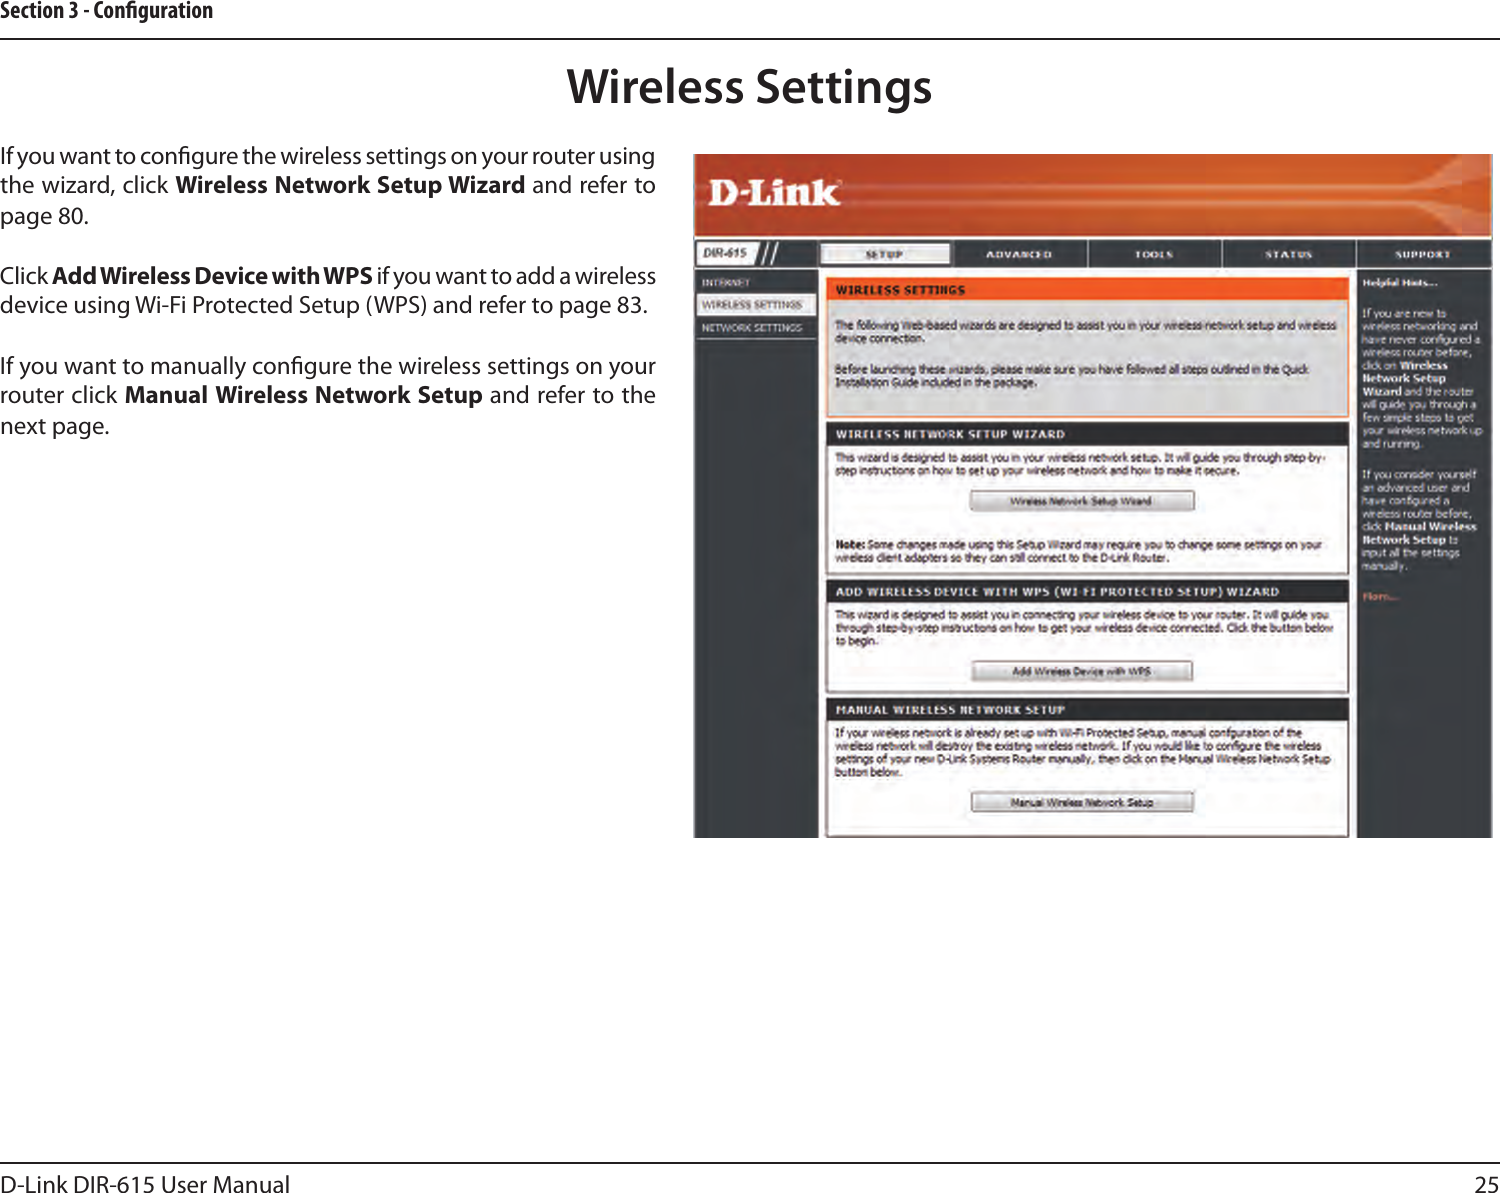 25D-Link DIR-615 User ManualSection 3 - CongurationWireless SettingsIf you want to congure the wireless settings on your router using the wizard, click Wireless Network Setup Wizard and refer to page 80.Click Add Wireless Device with WPS if you want to add a wireless device using Wi-Fi Protected Setup (WPS) and refer to page 83.If you want to manually congure the wireless settings on your router click Manual Wireless Network Setup and refer to the next page.